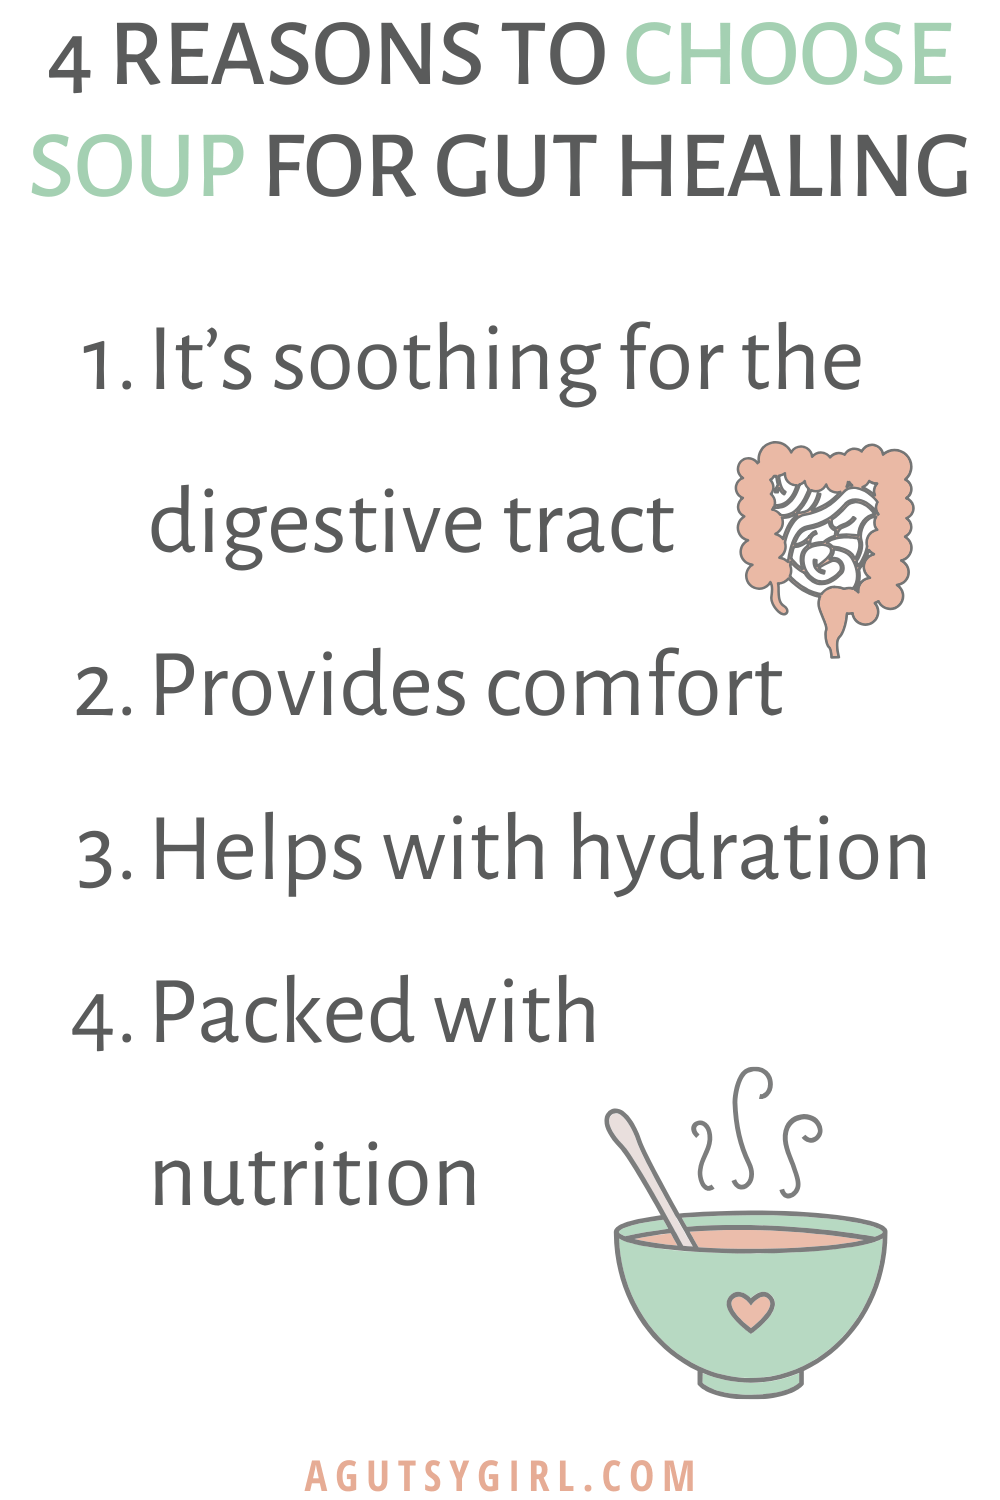 4 Reasons to Choose Soup for Gut Healing agutsygirl.com #paleosoup #souprecipes #guthealth #gut